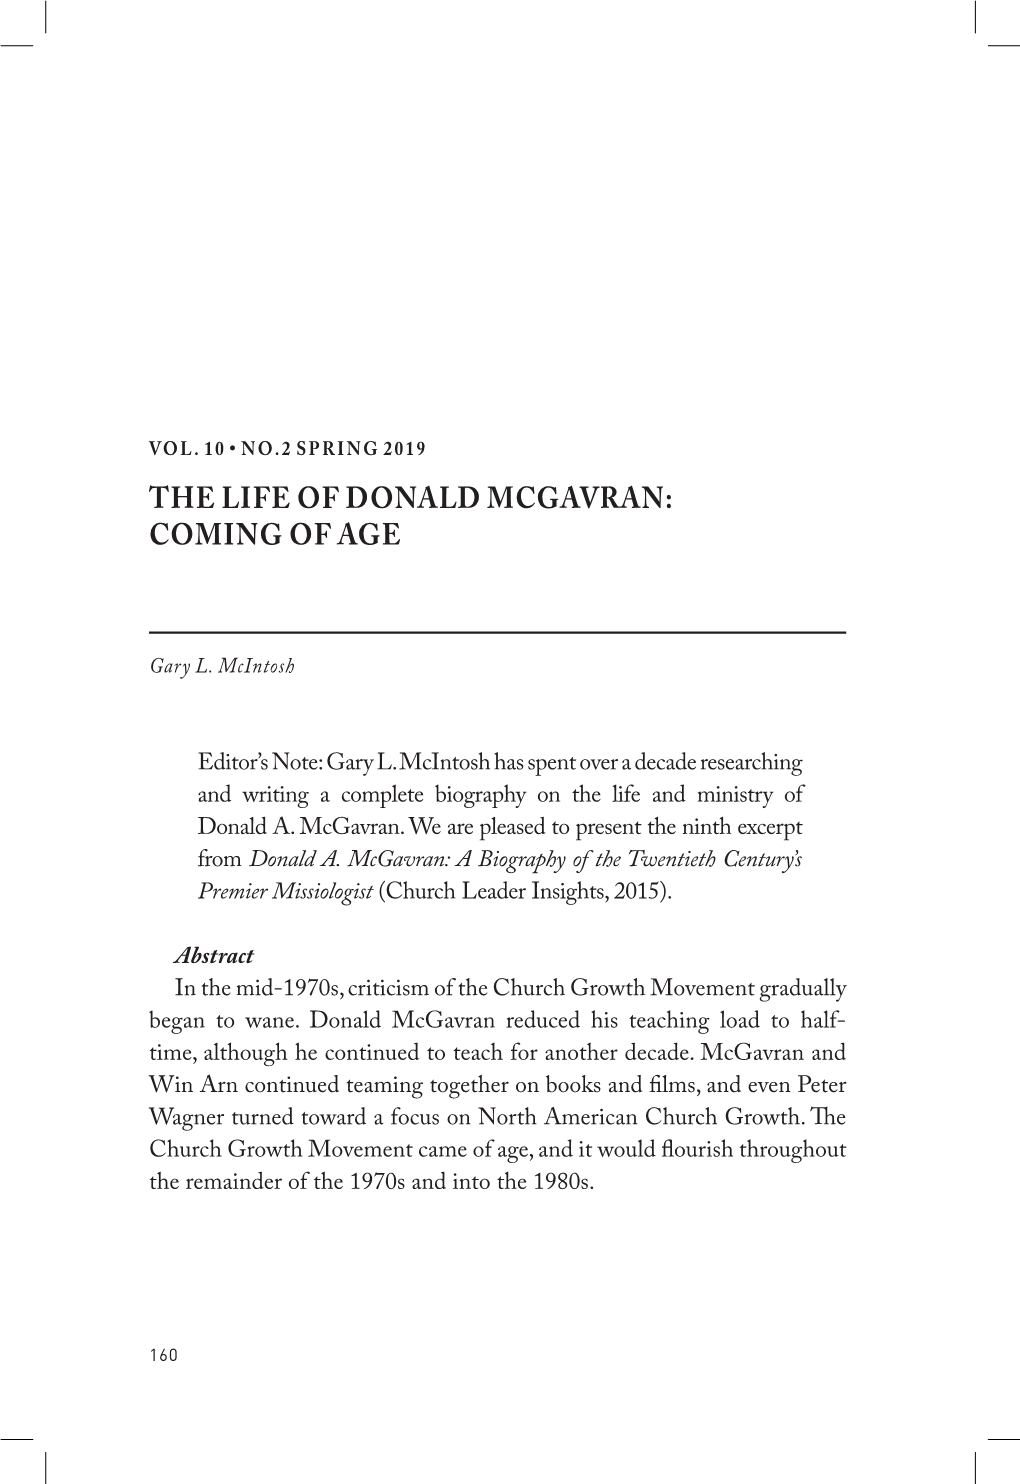 The Life of Donald Mcgavran: Coming of Age